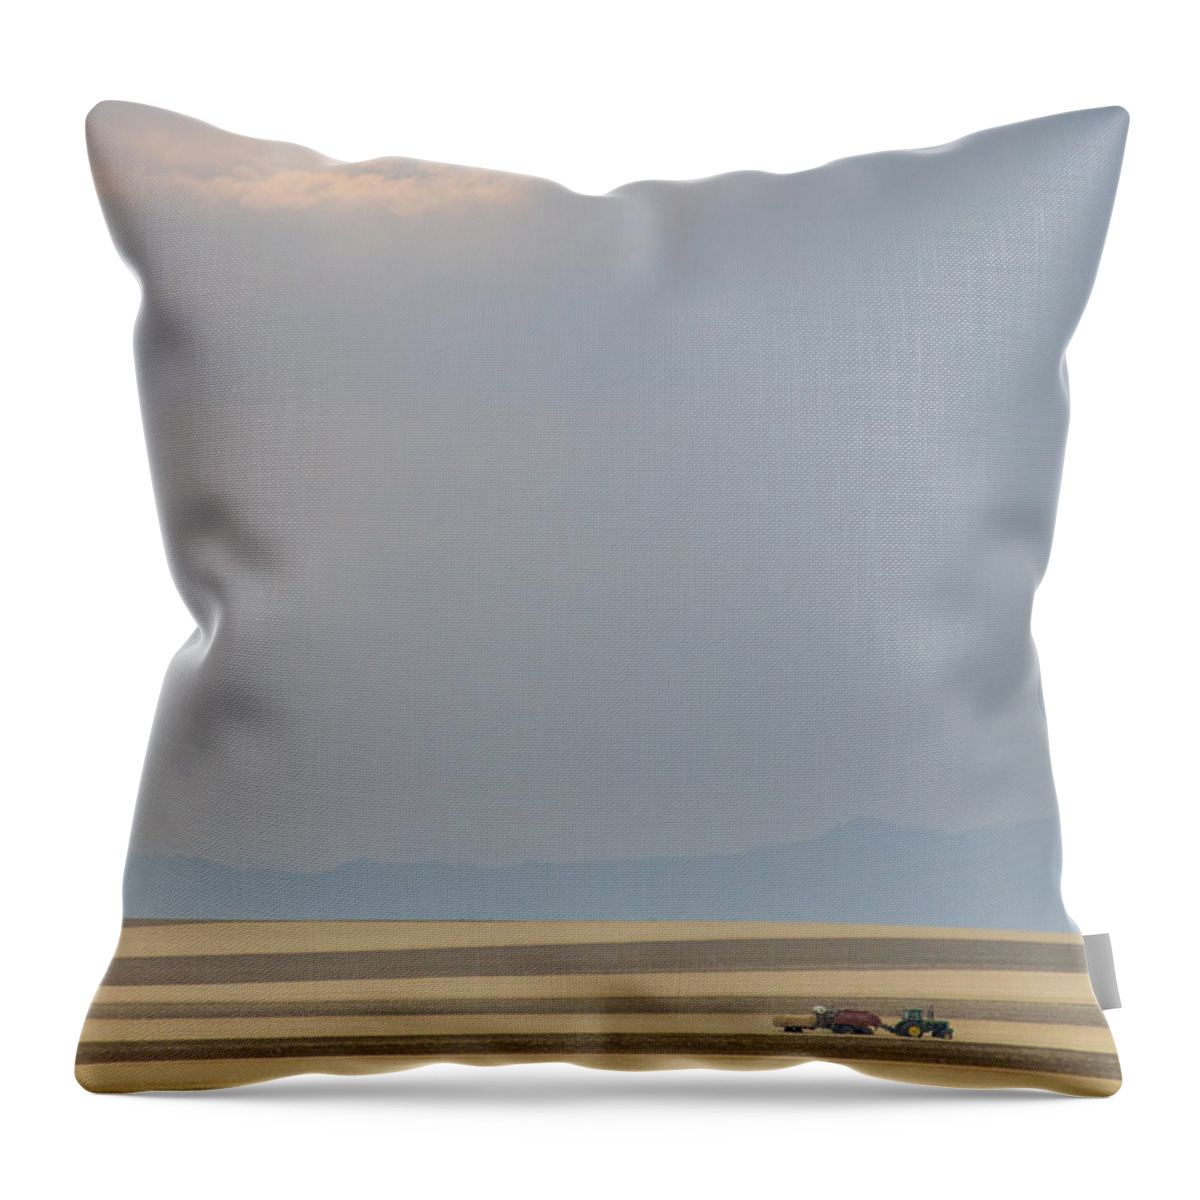 Portrait Throw Pillow featuring the photograph Boulder County Colorado Open Space Portrait View by James BO Insogna